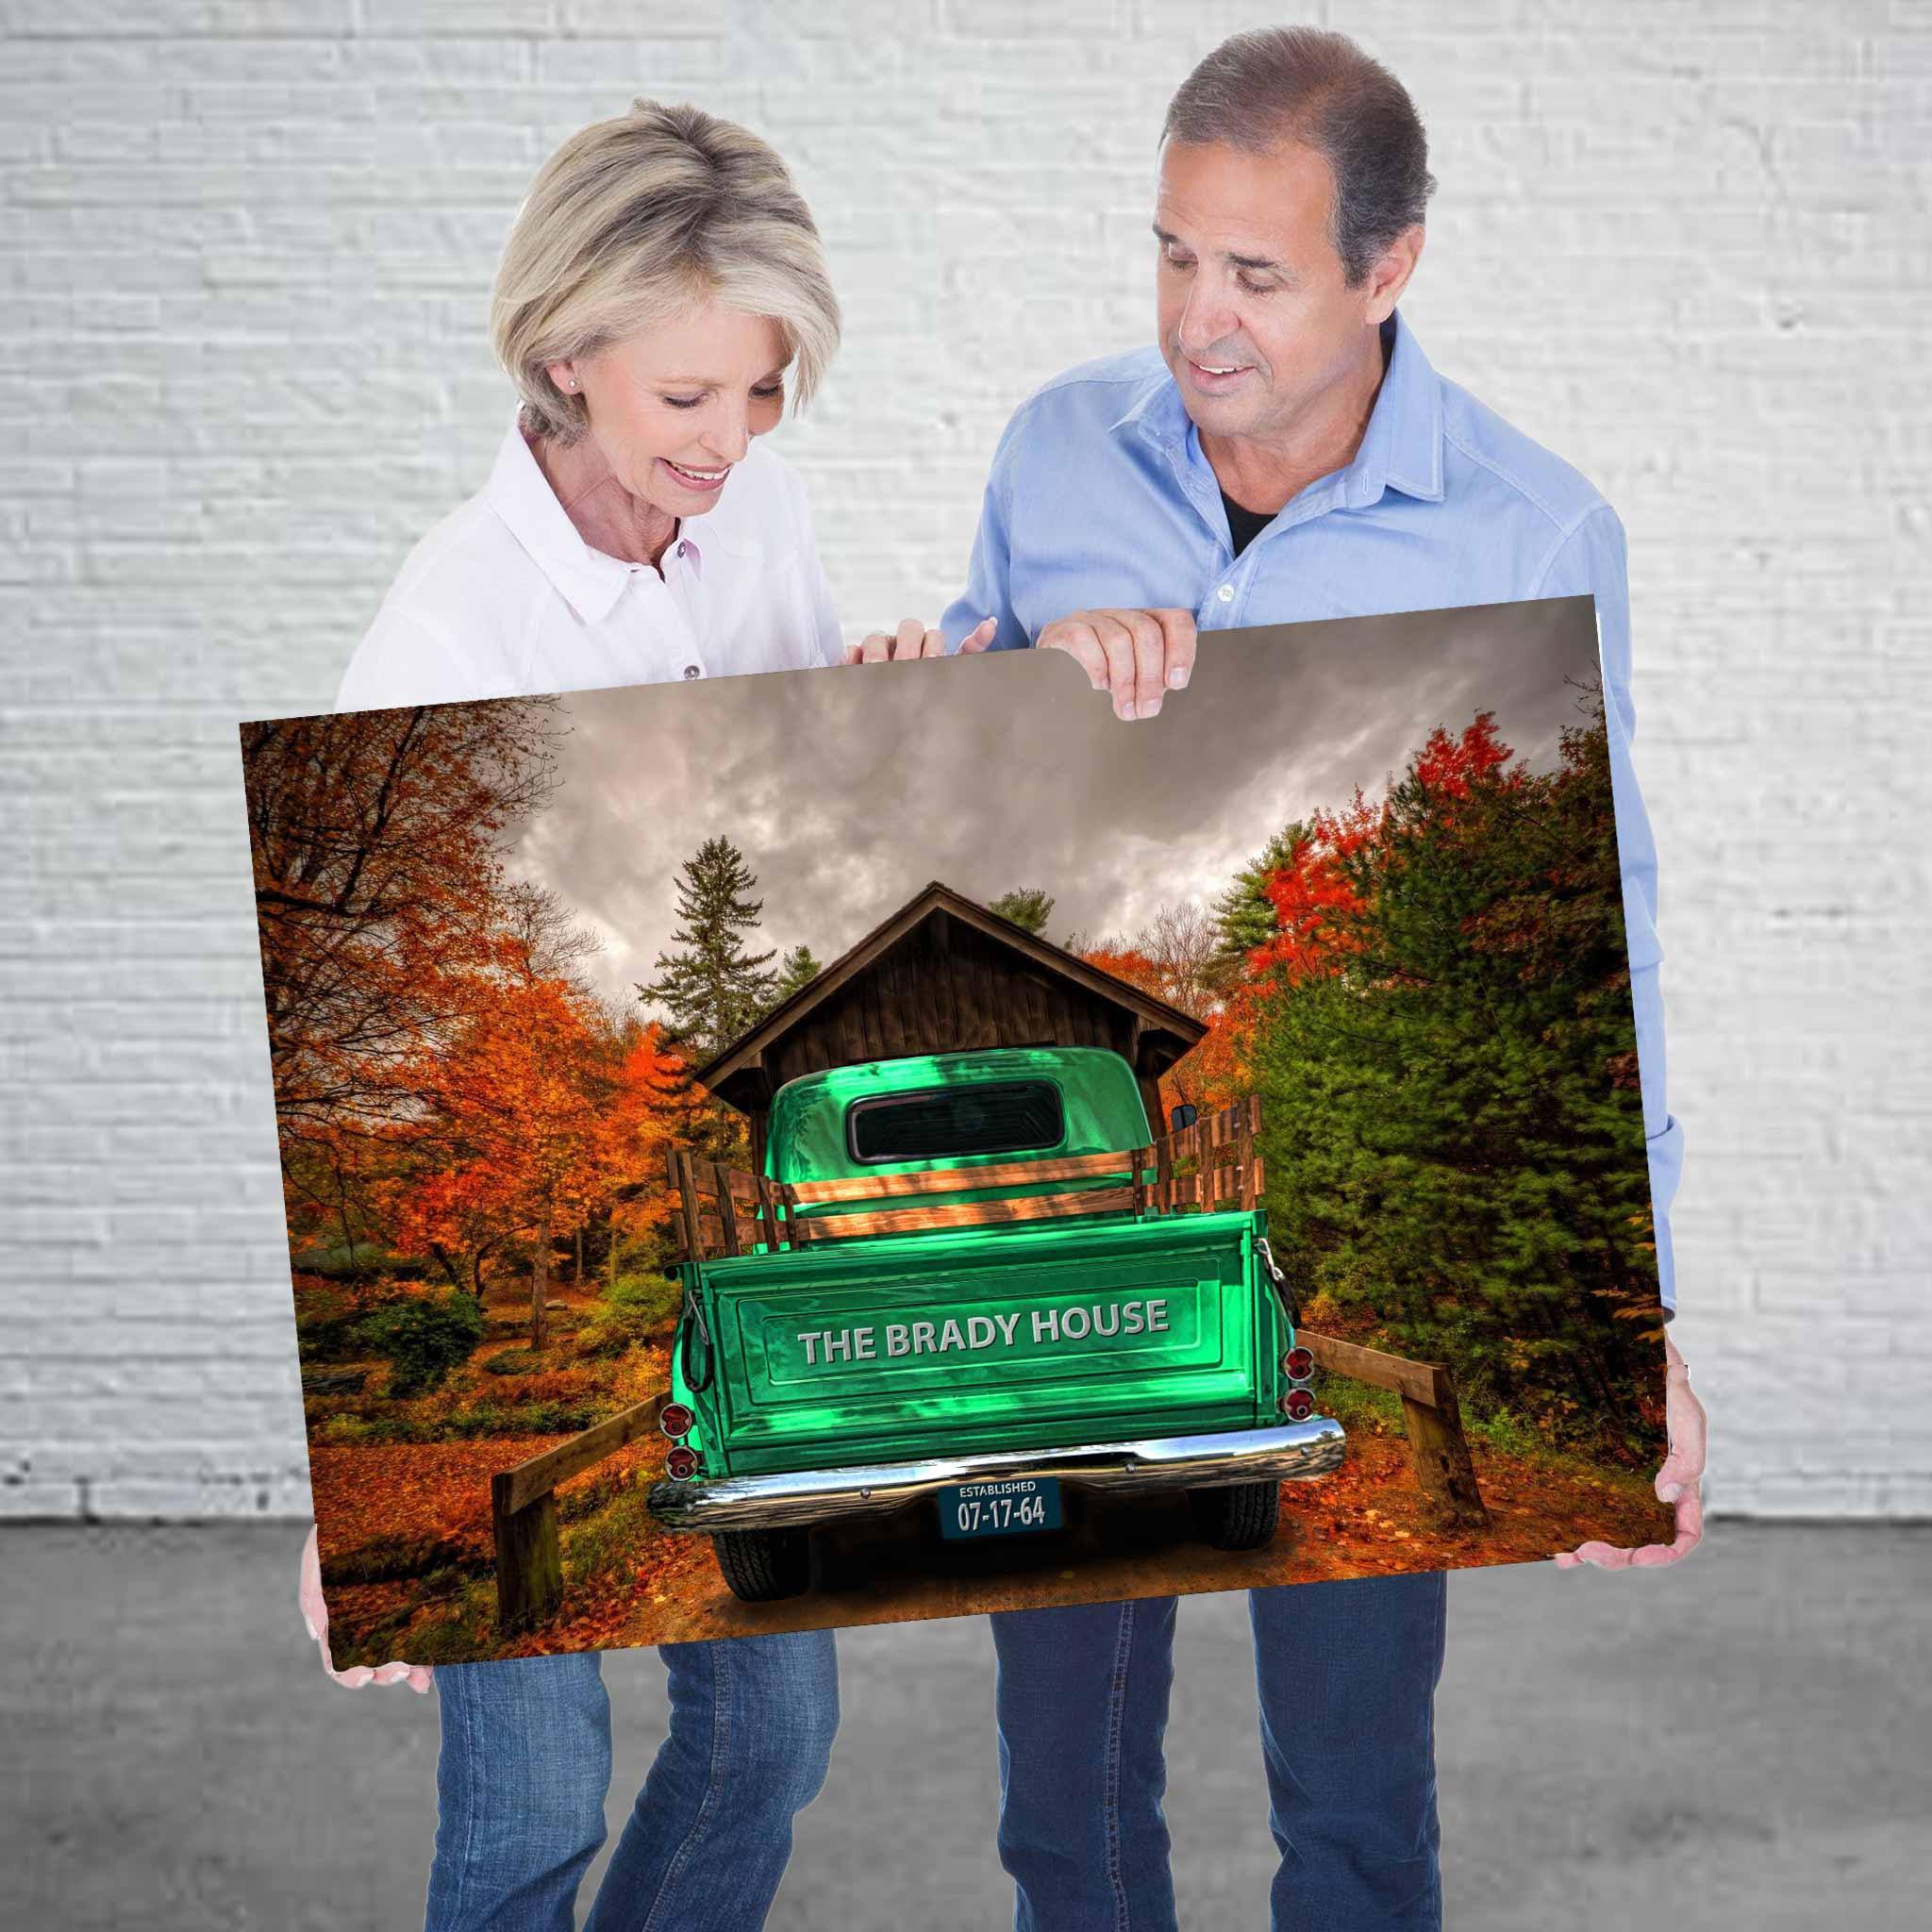 Vintage Truck (Mint Green) On Covered Bridge Personalized Tailgate & License Plate CanvasCustomly Gifts